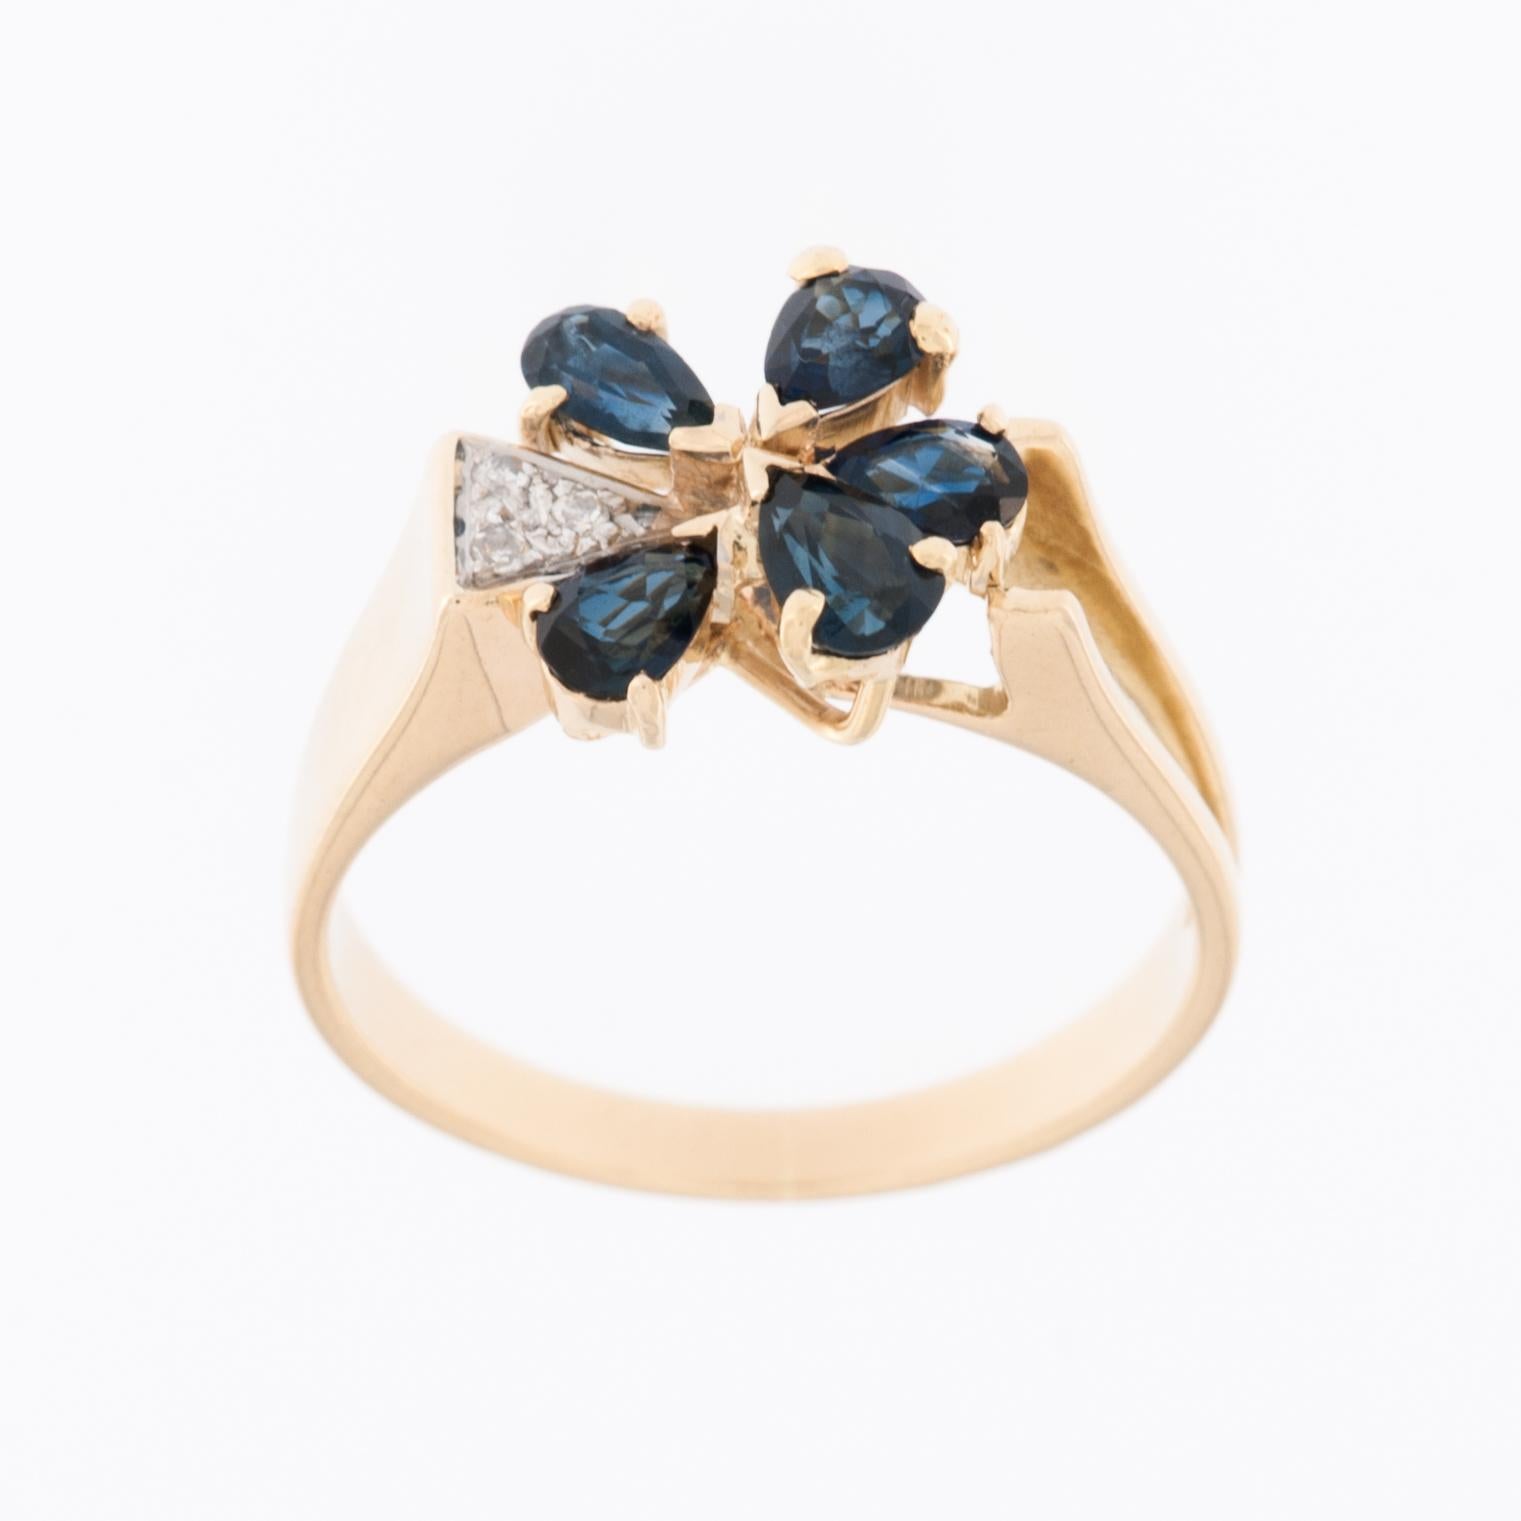 The German 14kt Yellow Gold Ring with Diamonds and Sapphire is a beautiful piece of jewelry known for its elegant and intricate flower design. 

The ring is crafted from 14-karat (14kt) yellow gold, which gives it a warm and lustrous appearance.